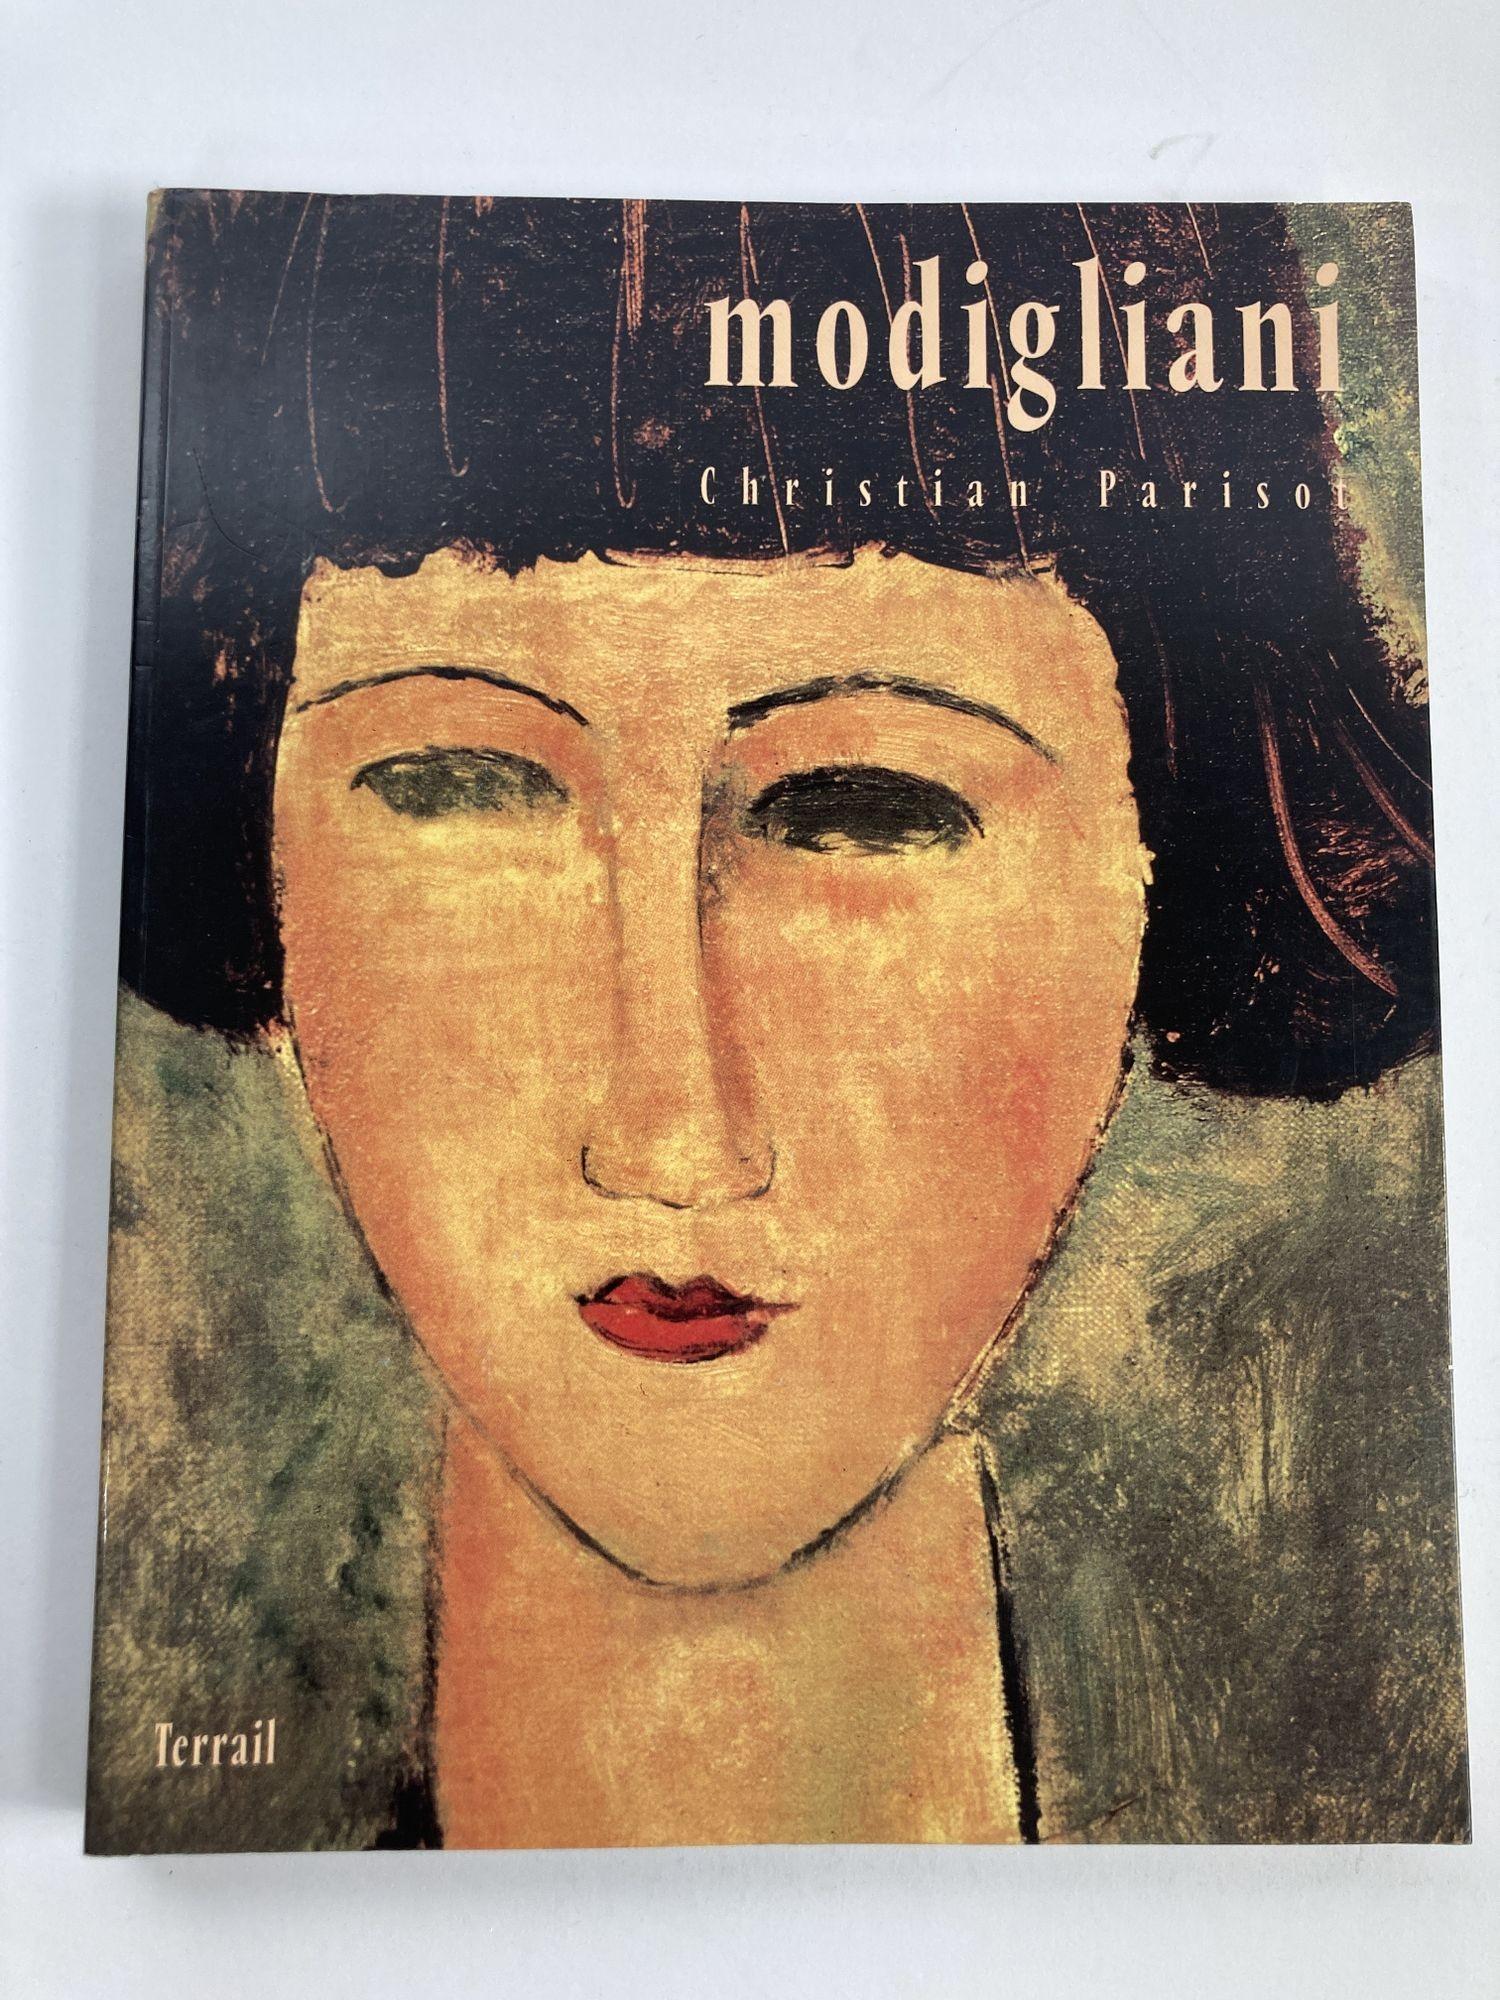 Modigliani by Christian Pariso - 1992.
Published by Pierre Terrail., Paris., 1992.
Illustrated in black, white and color. Important reference work.

Title: Modigliani.
Publisher: Pierre Terrail., Paris.
Publication Date: 1992
Binding: Soft